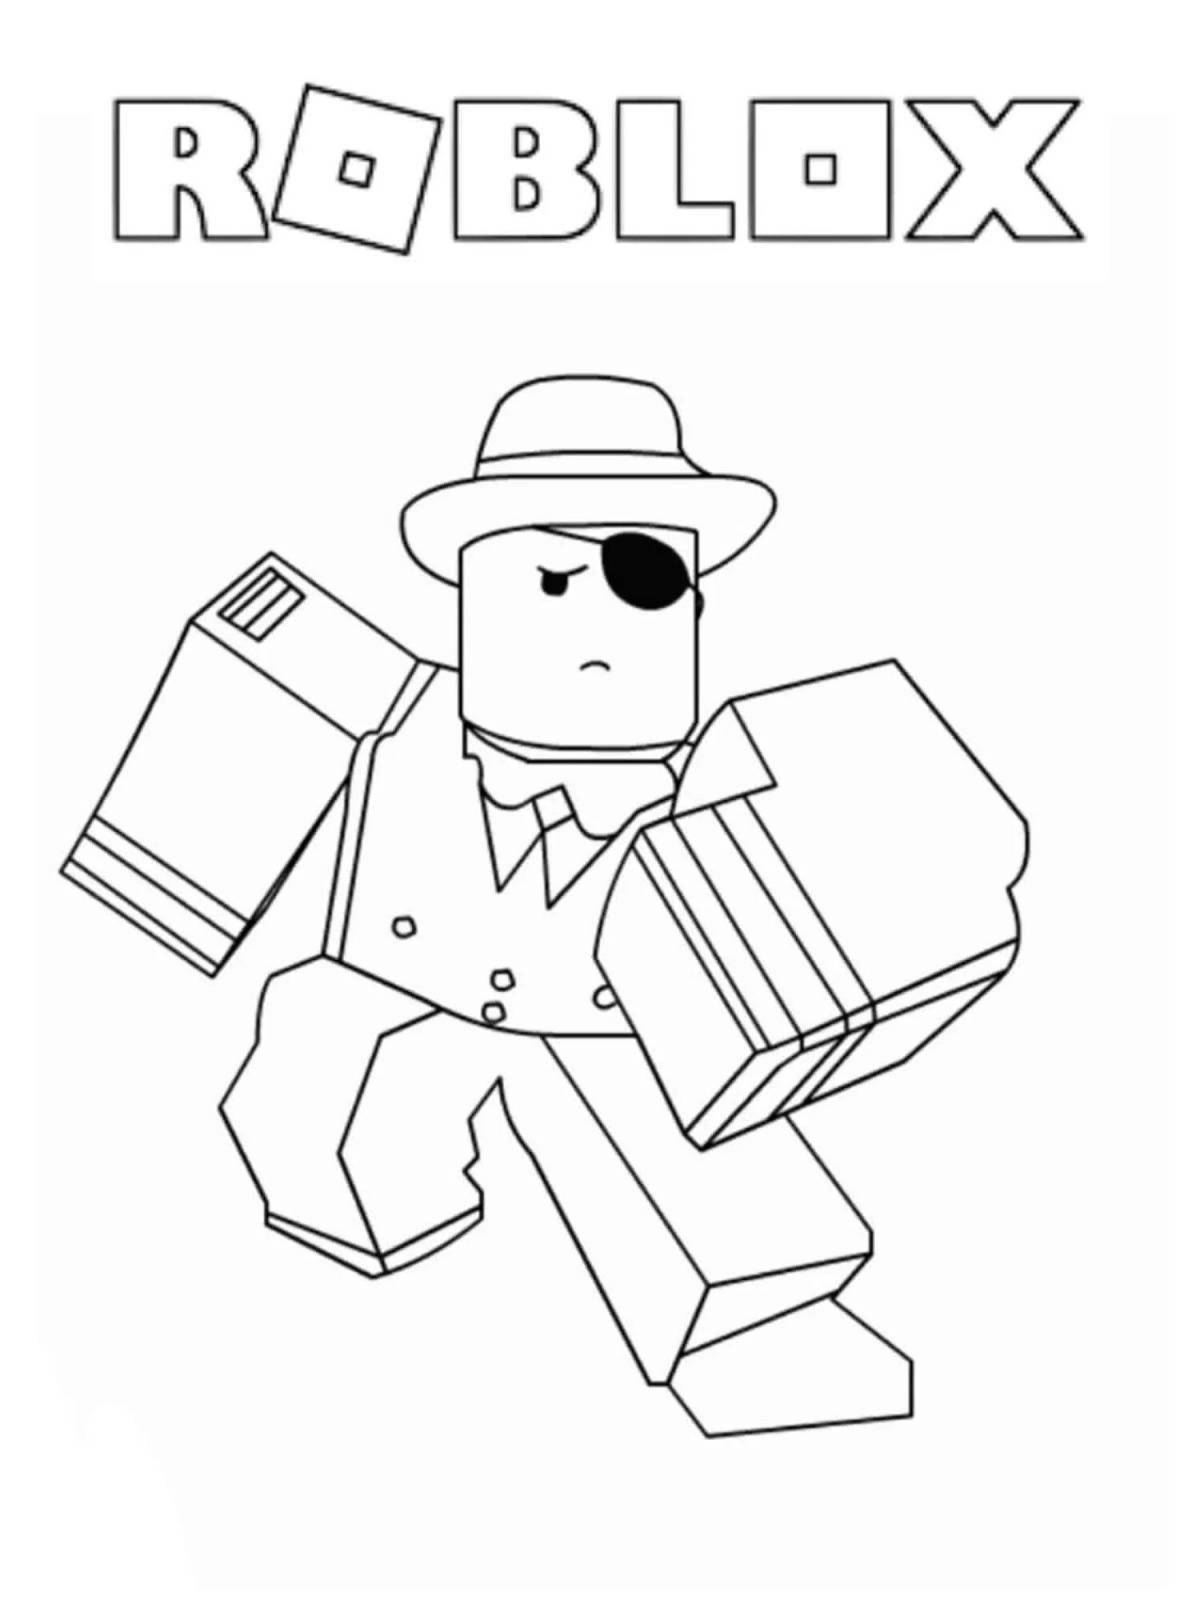 Robloxers live coloring pages